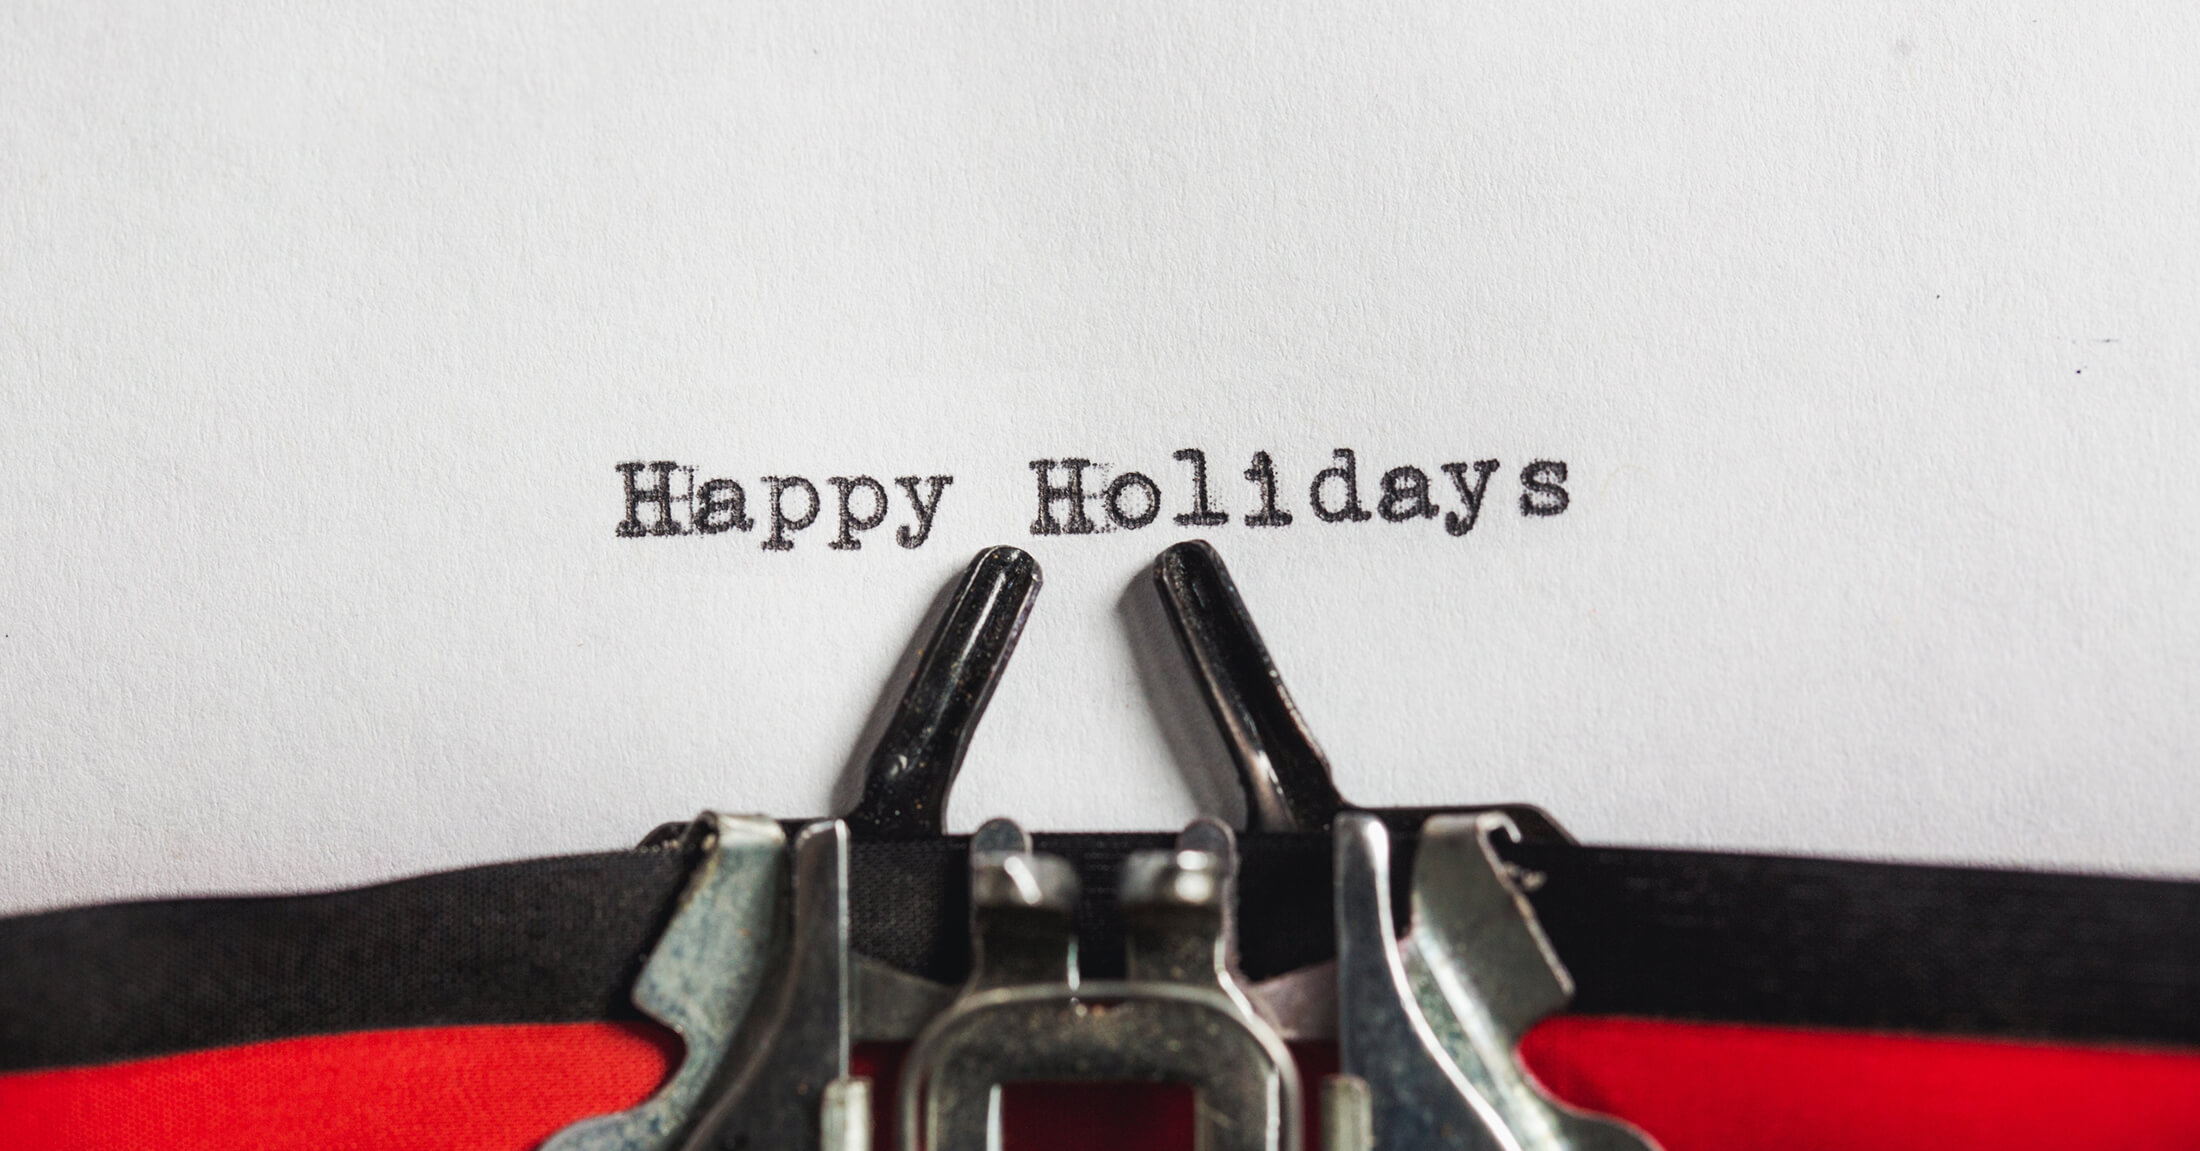 Happy Holidays and Seasons Greetings from The Big Mail Project. The Pros and Cons of creating Holiday Cards